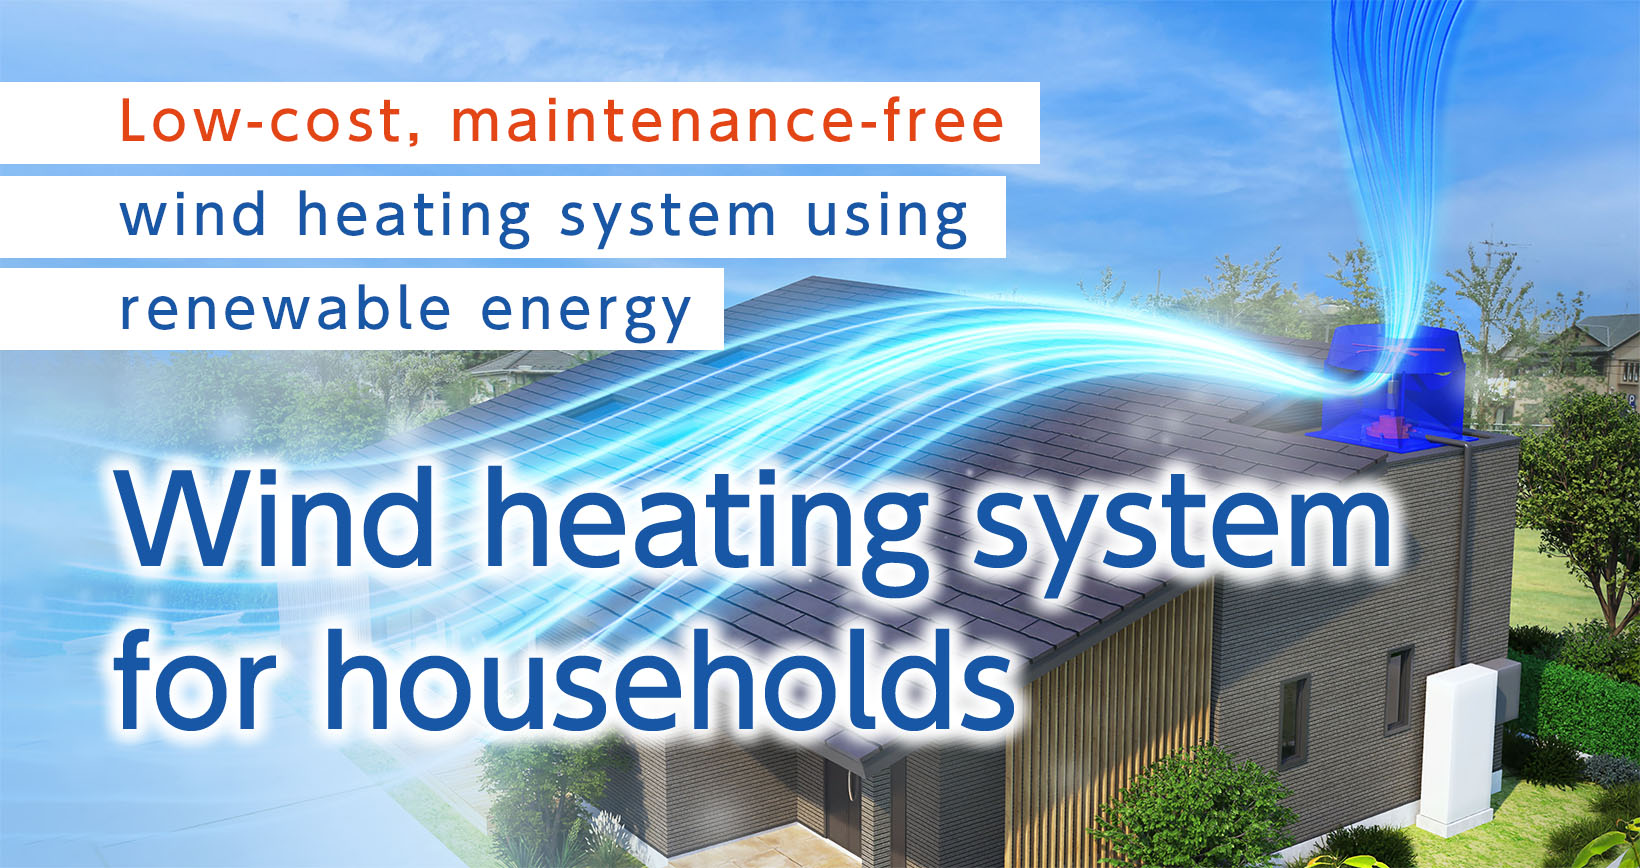 Wind heating system for households